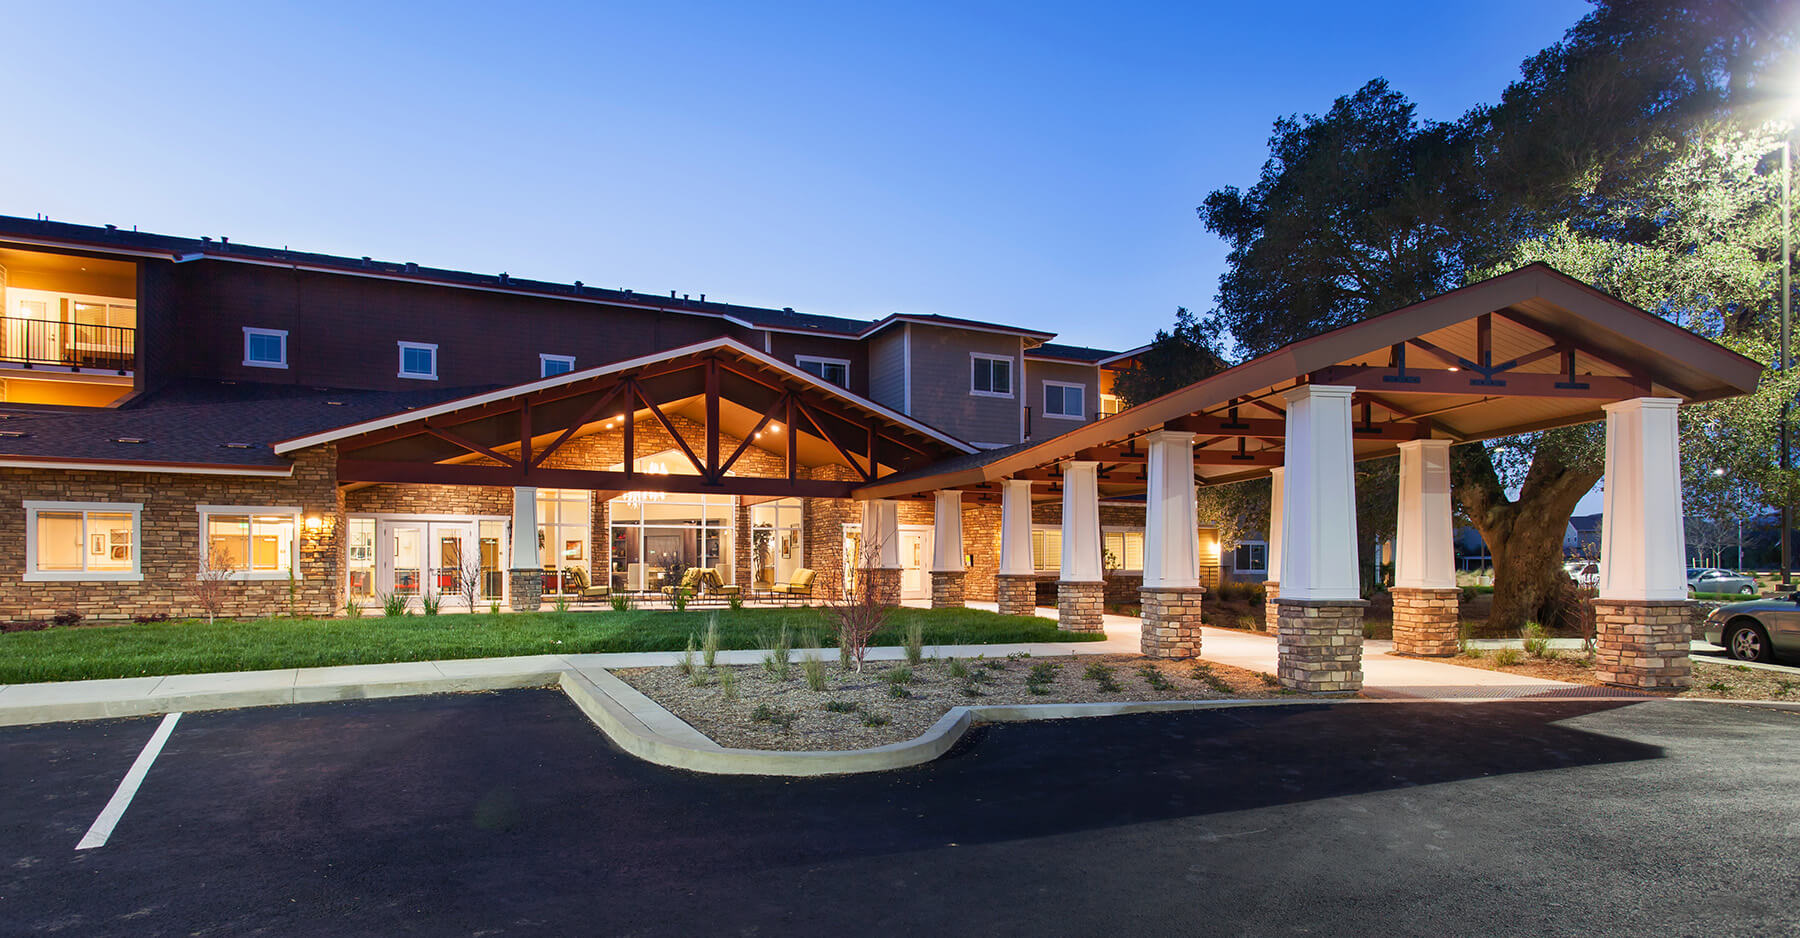 The building exterior of the leasing center at The Lodge at Morgan Hill Senior Apartments in San Jose, California.